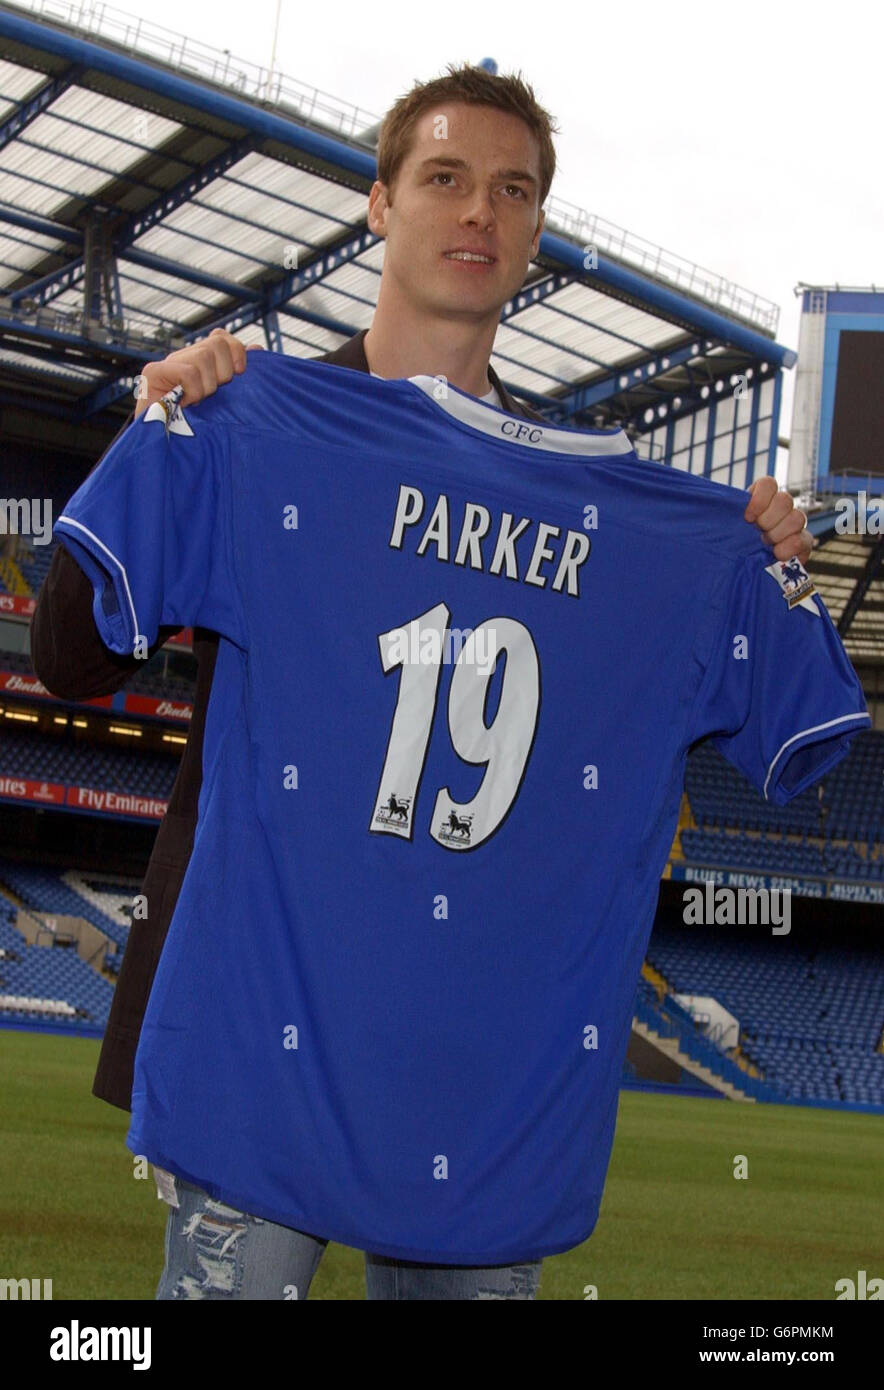 Scott Parker holds his 19 shirt as he is unveiled as Chelsea's new signing at Stamford Bridge, London. Chelsea signed the former Charlton midfielder for 10 million, the latest in a string of big money signings since Russian billionaire Roman Abramovich bought the club last July. Stock Photo